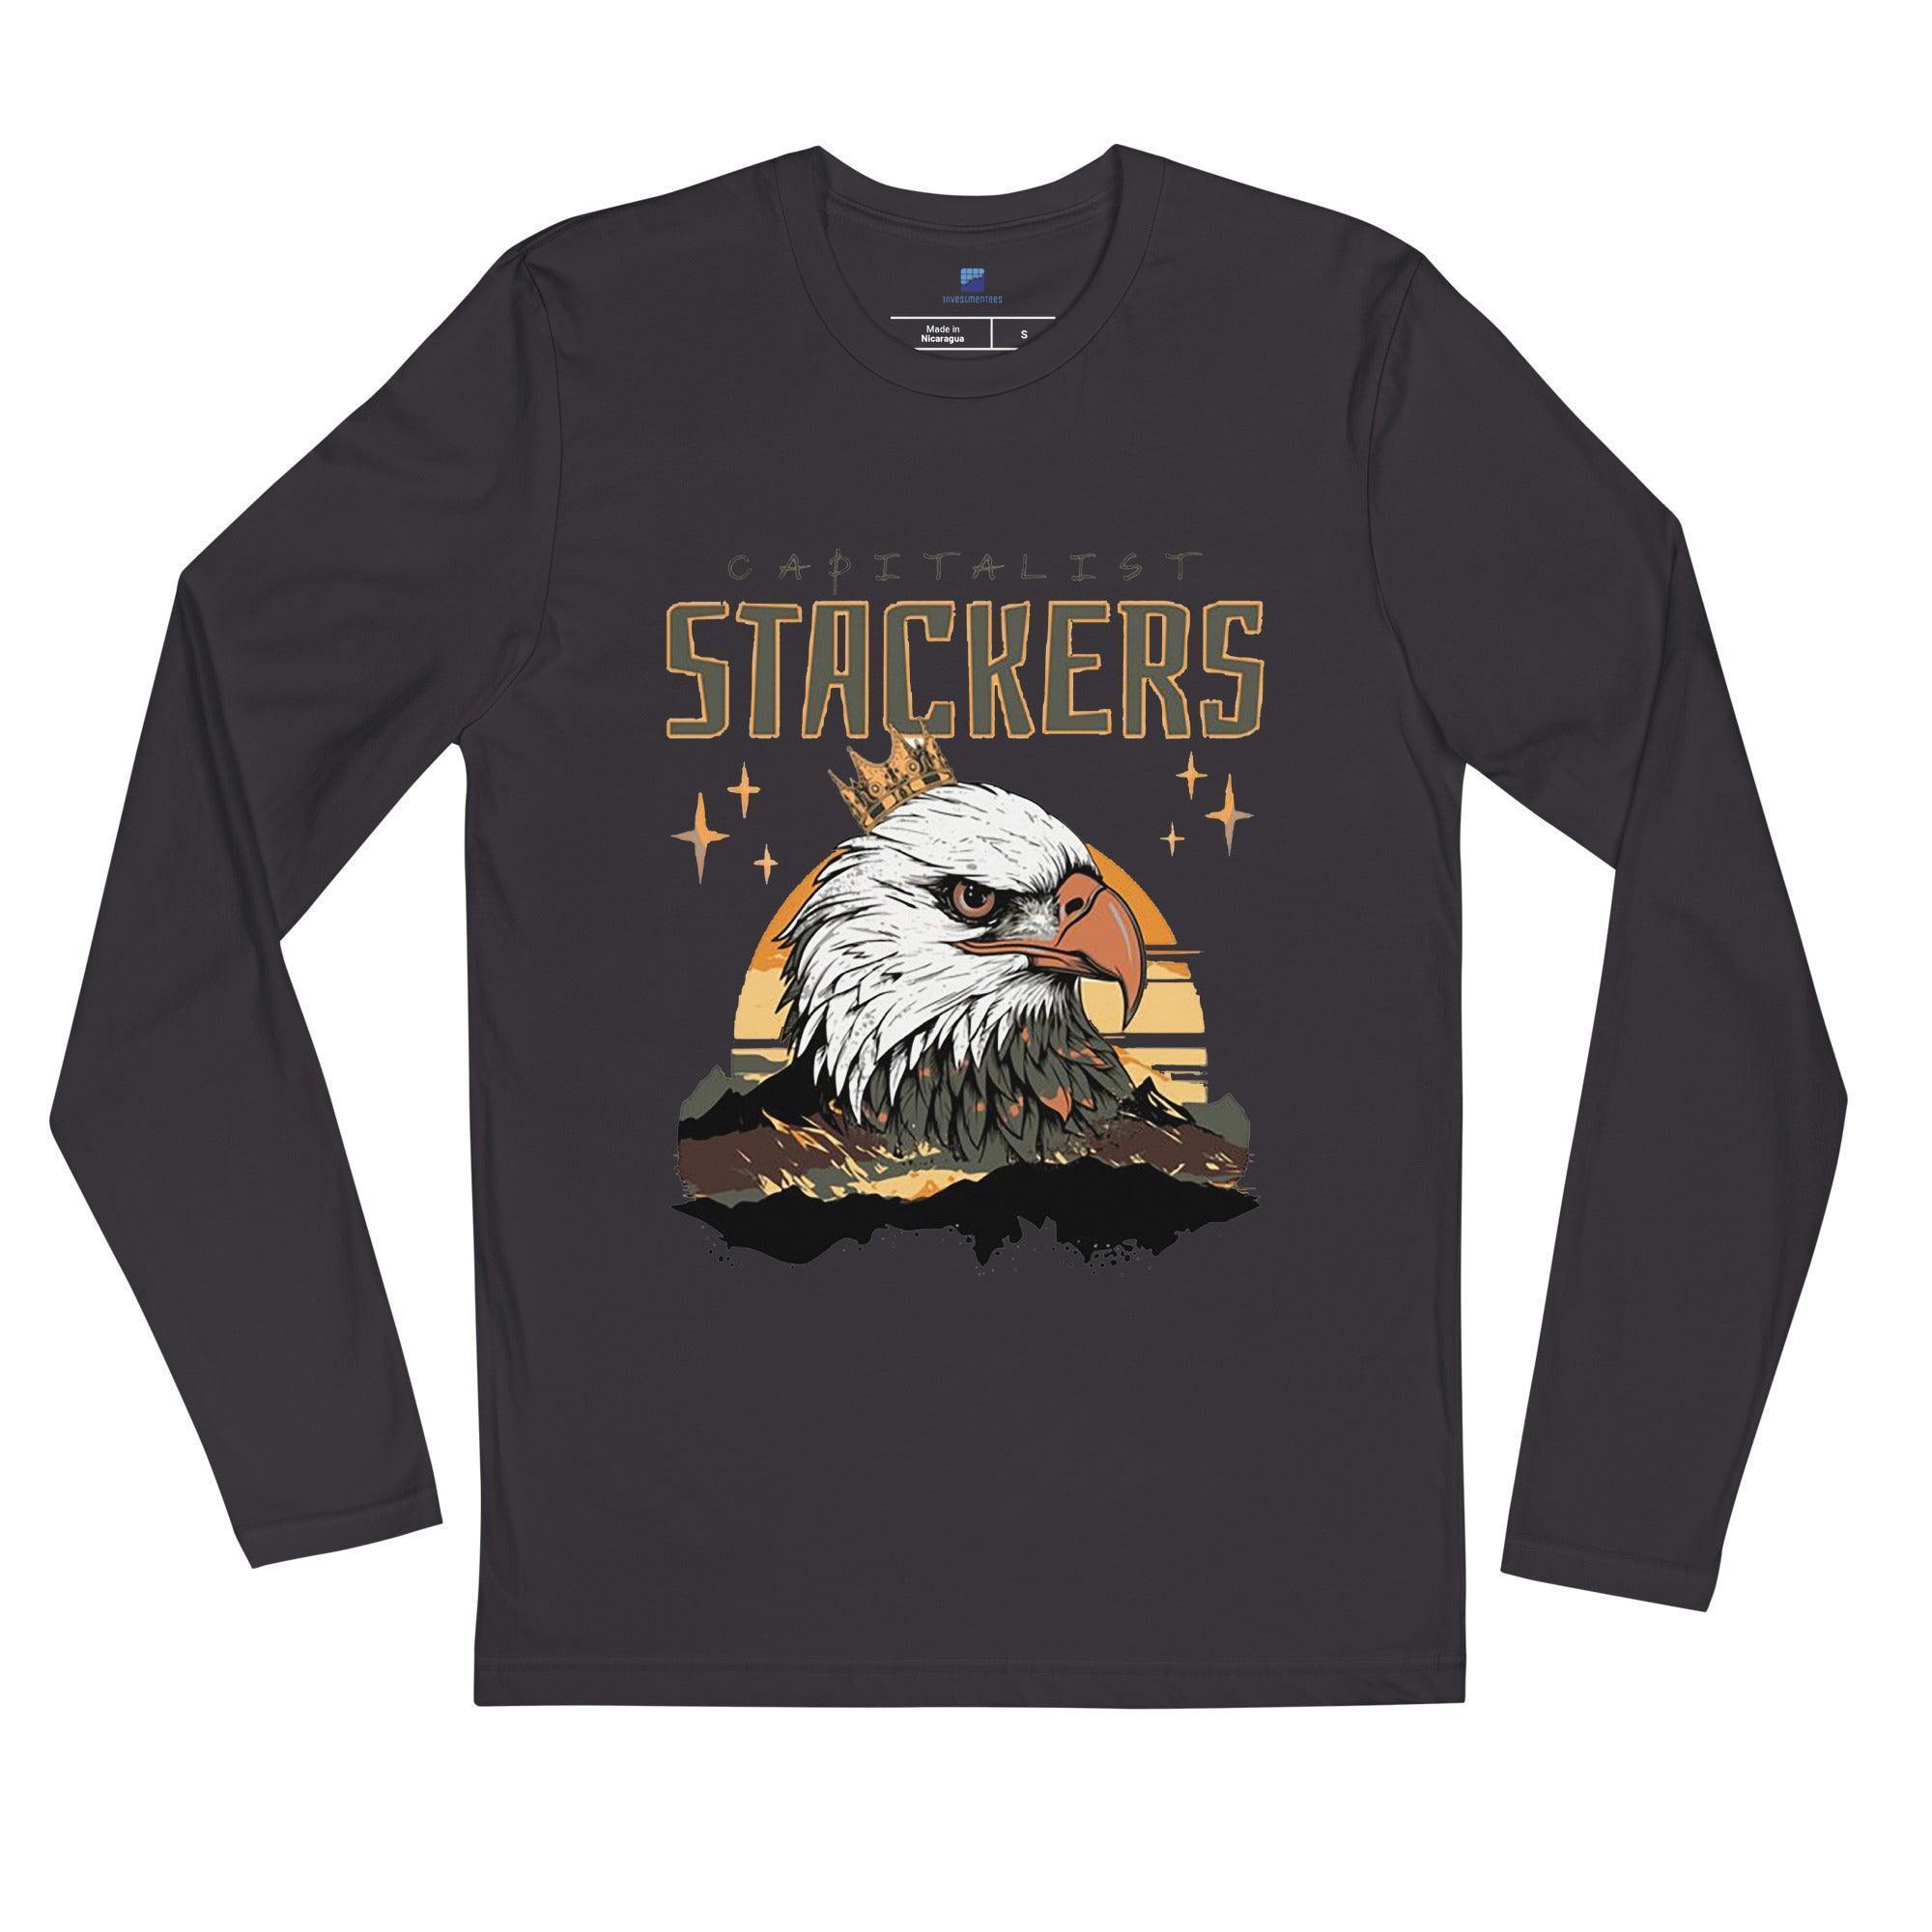 Capital Stackers Long Sleeve T-Shirt - InvestmenTees